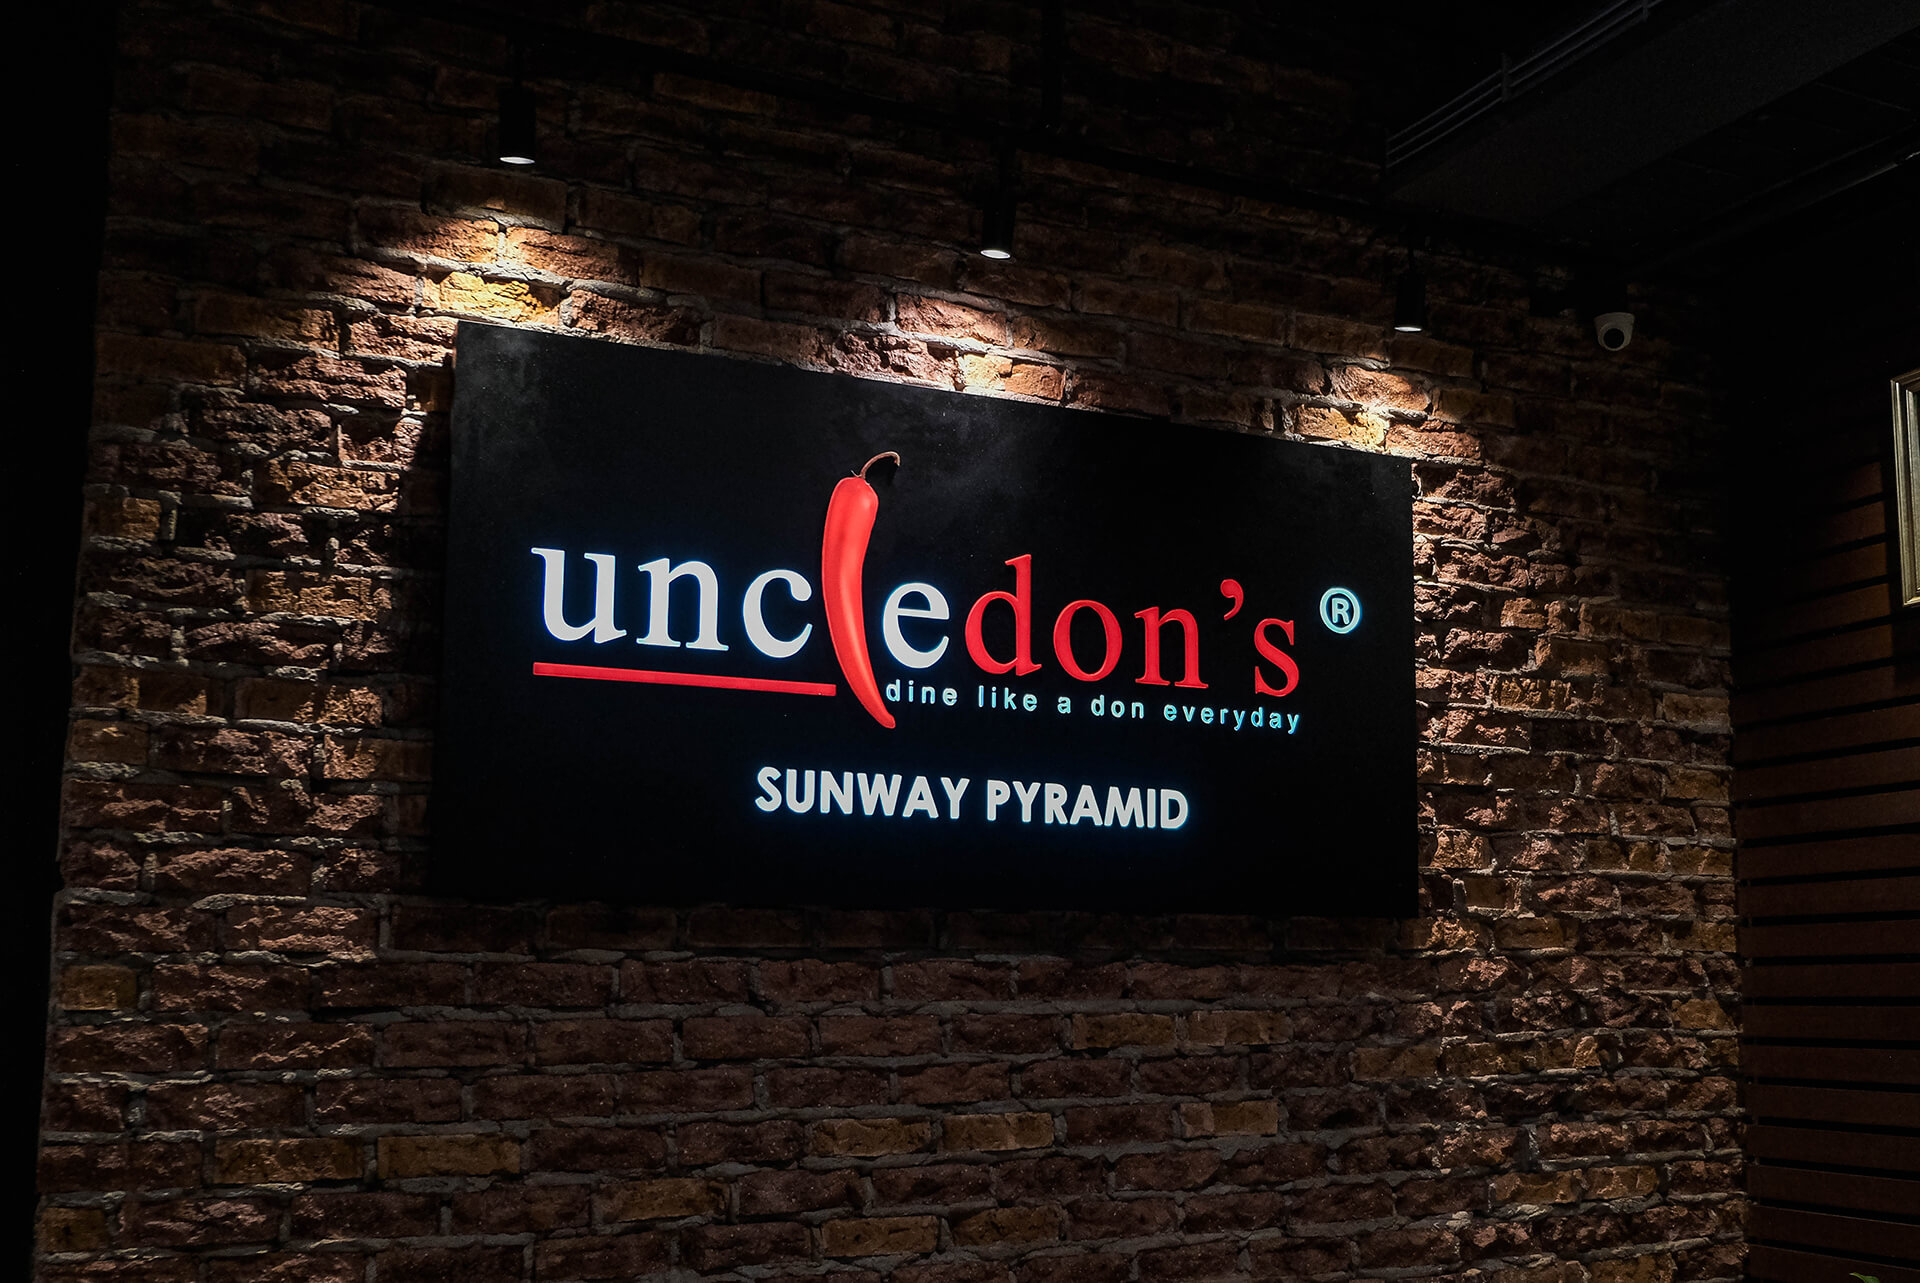 Just like the sign says - dine like a don everyday!